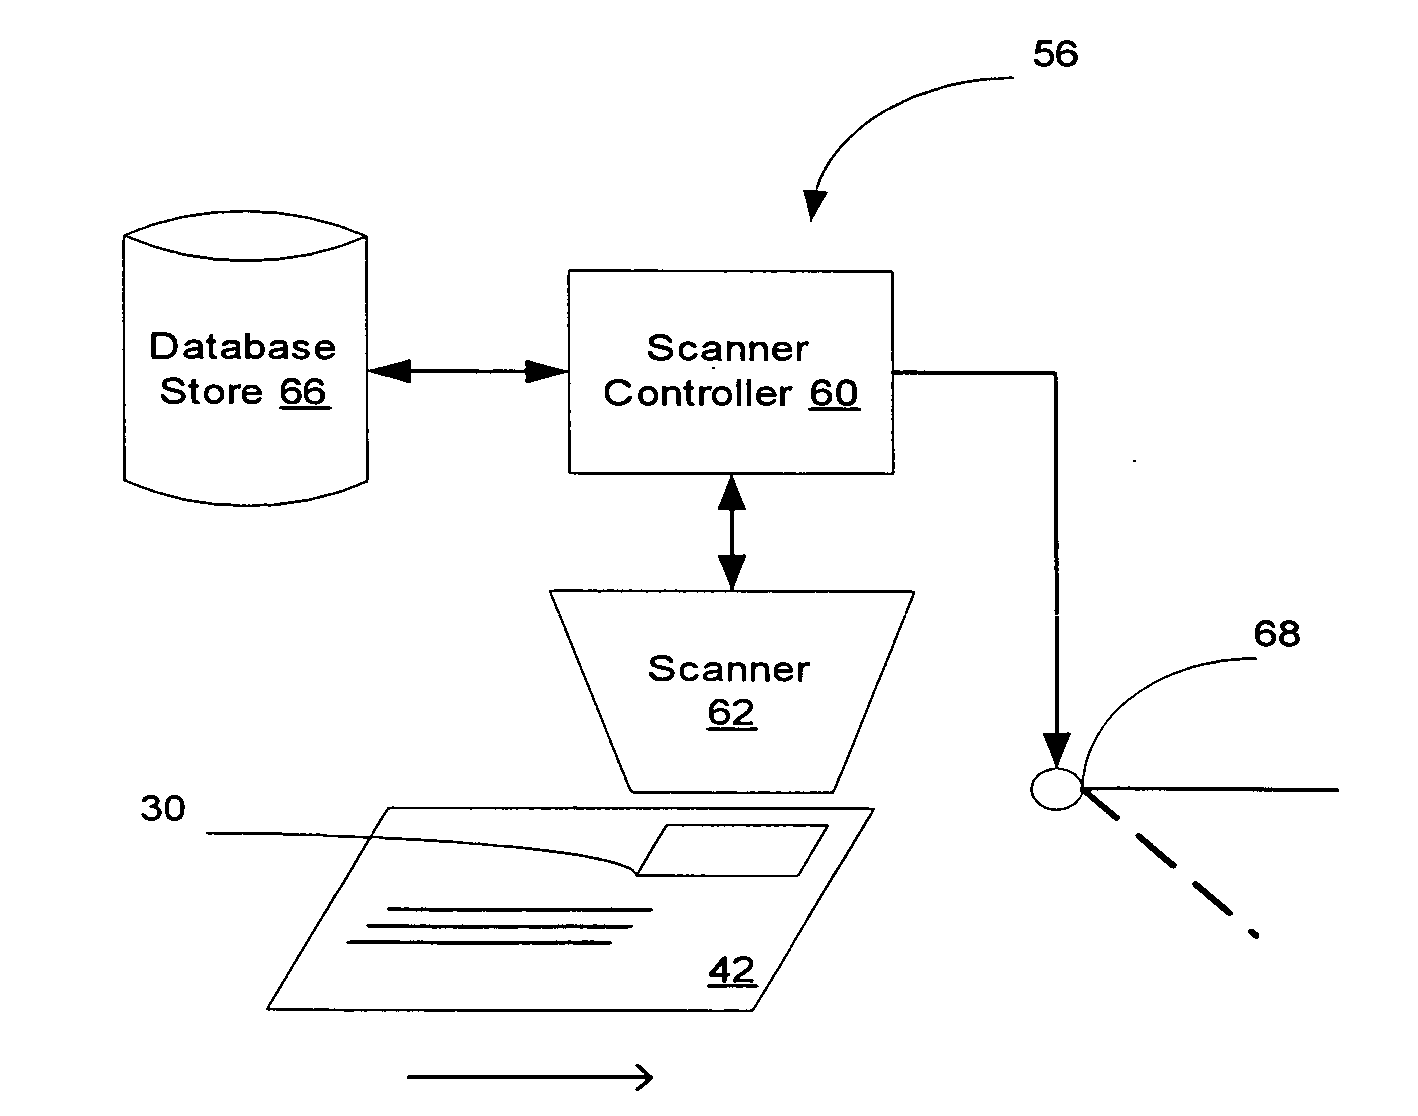 Method and system for printing an original image and for determining if a printed image is an original or has been altered